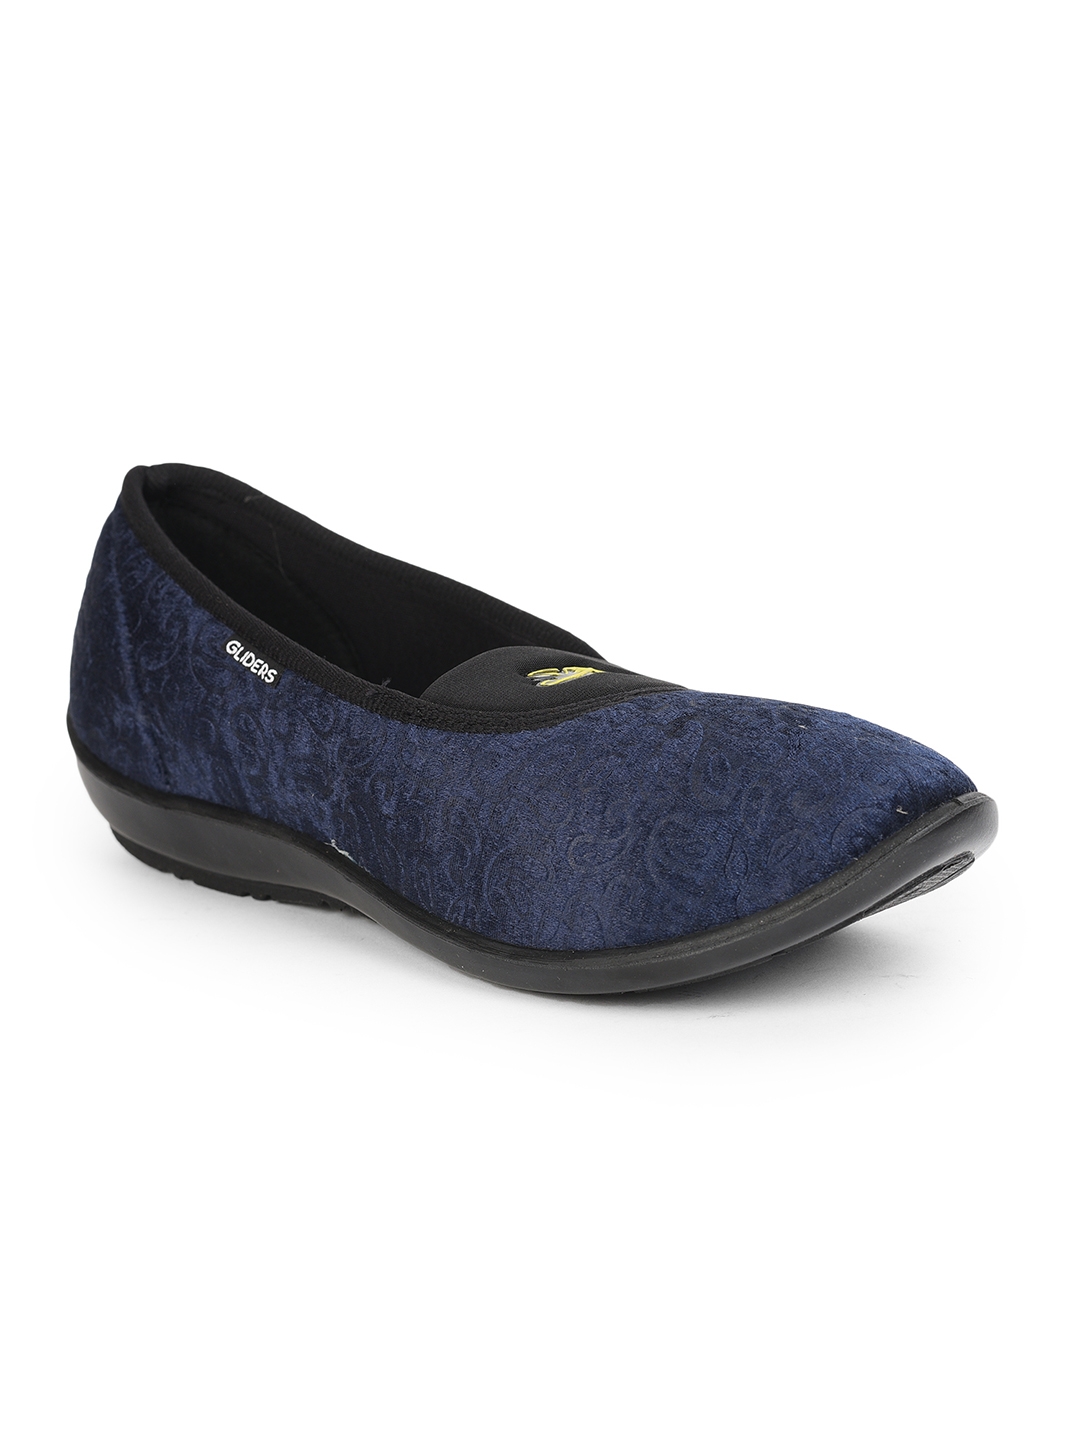 Liberty | Gliders by Liberty Blue Ballerinas ELENA-171 For :- Women